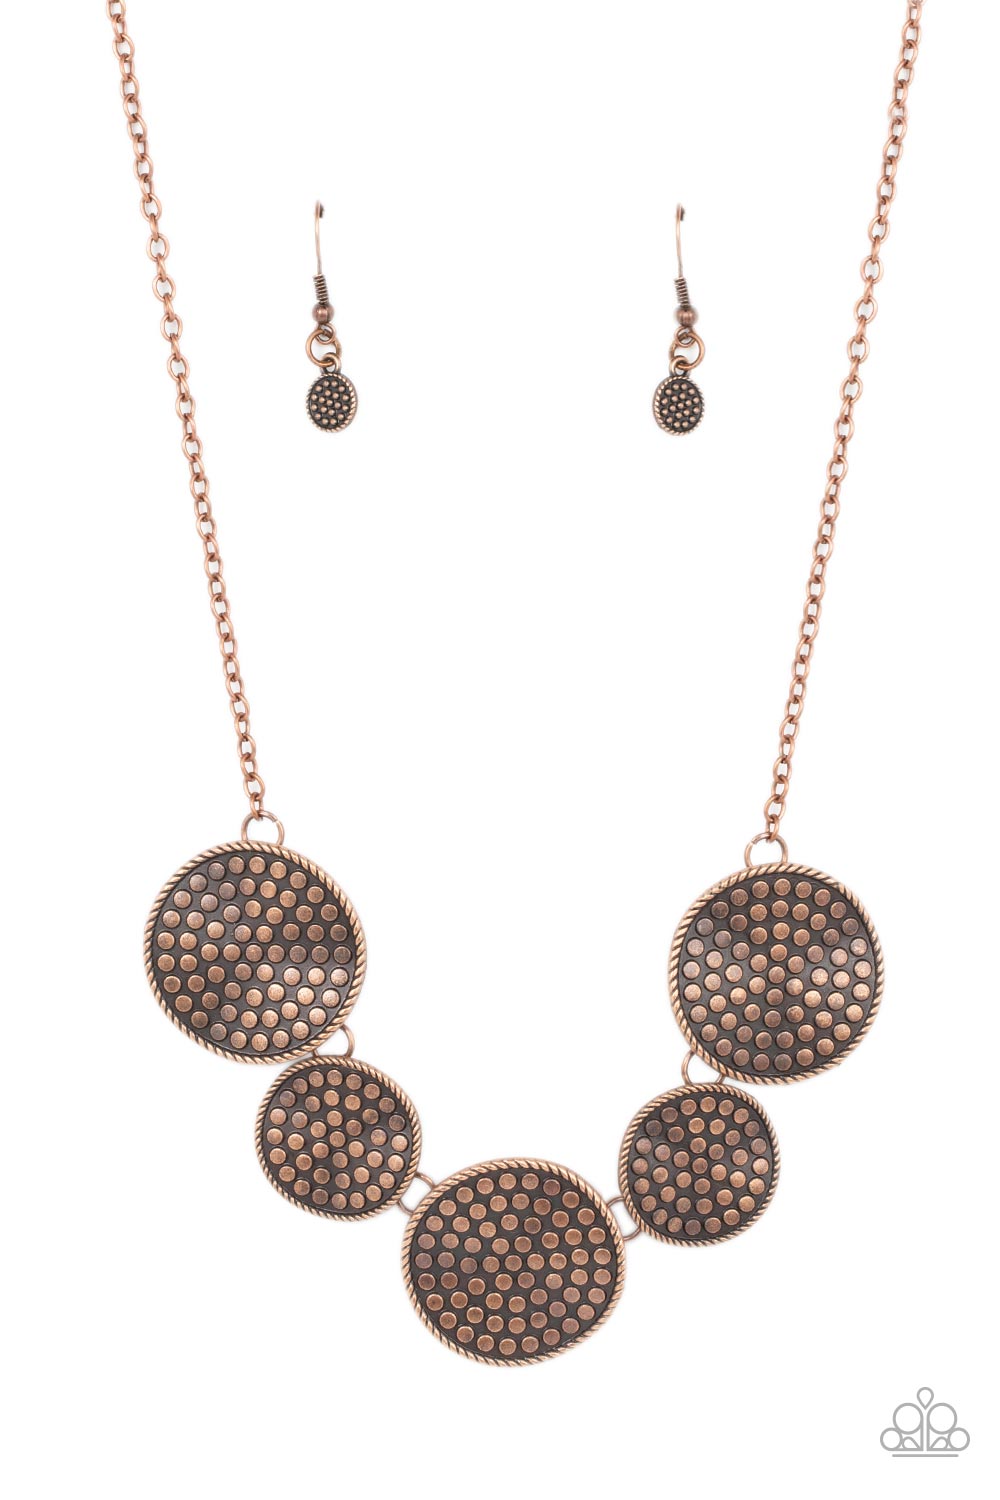 Self DISC-overy Copper Necklace - Paparazzi Accessories  Embossed in a dotted motif, a rustic collection of warped copper discs ruggedly links below the collar for an artisan inspired fashion. Features an adjustable clasp closure.  Sold as one individual necklace. Includes one pair of matching earrings.